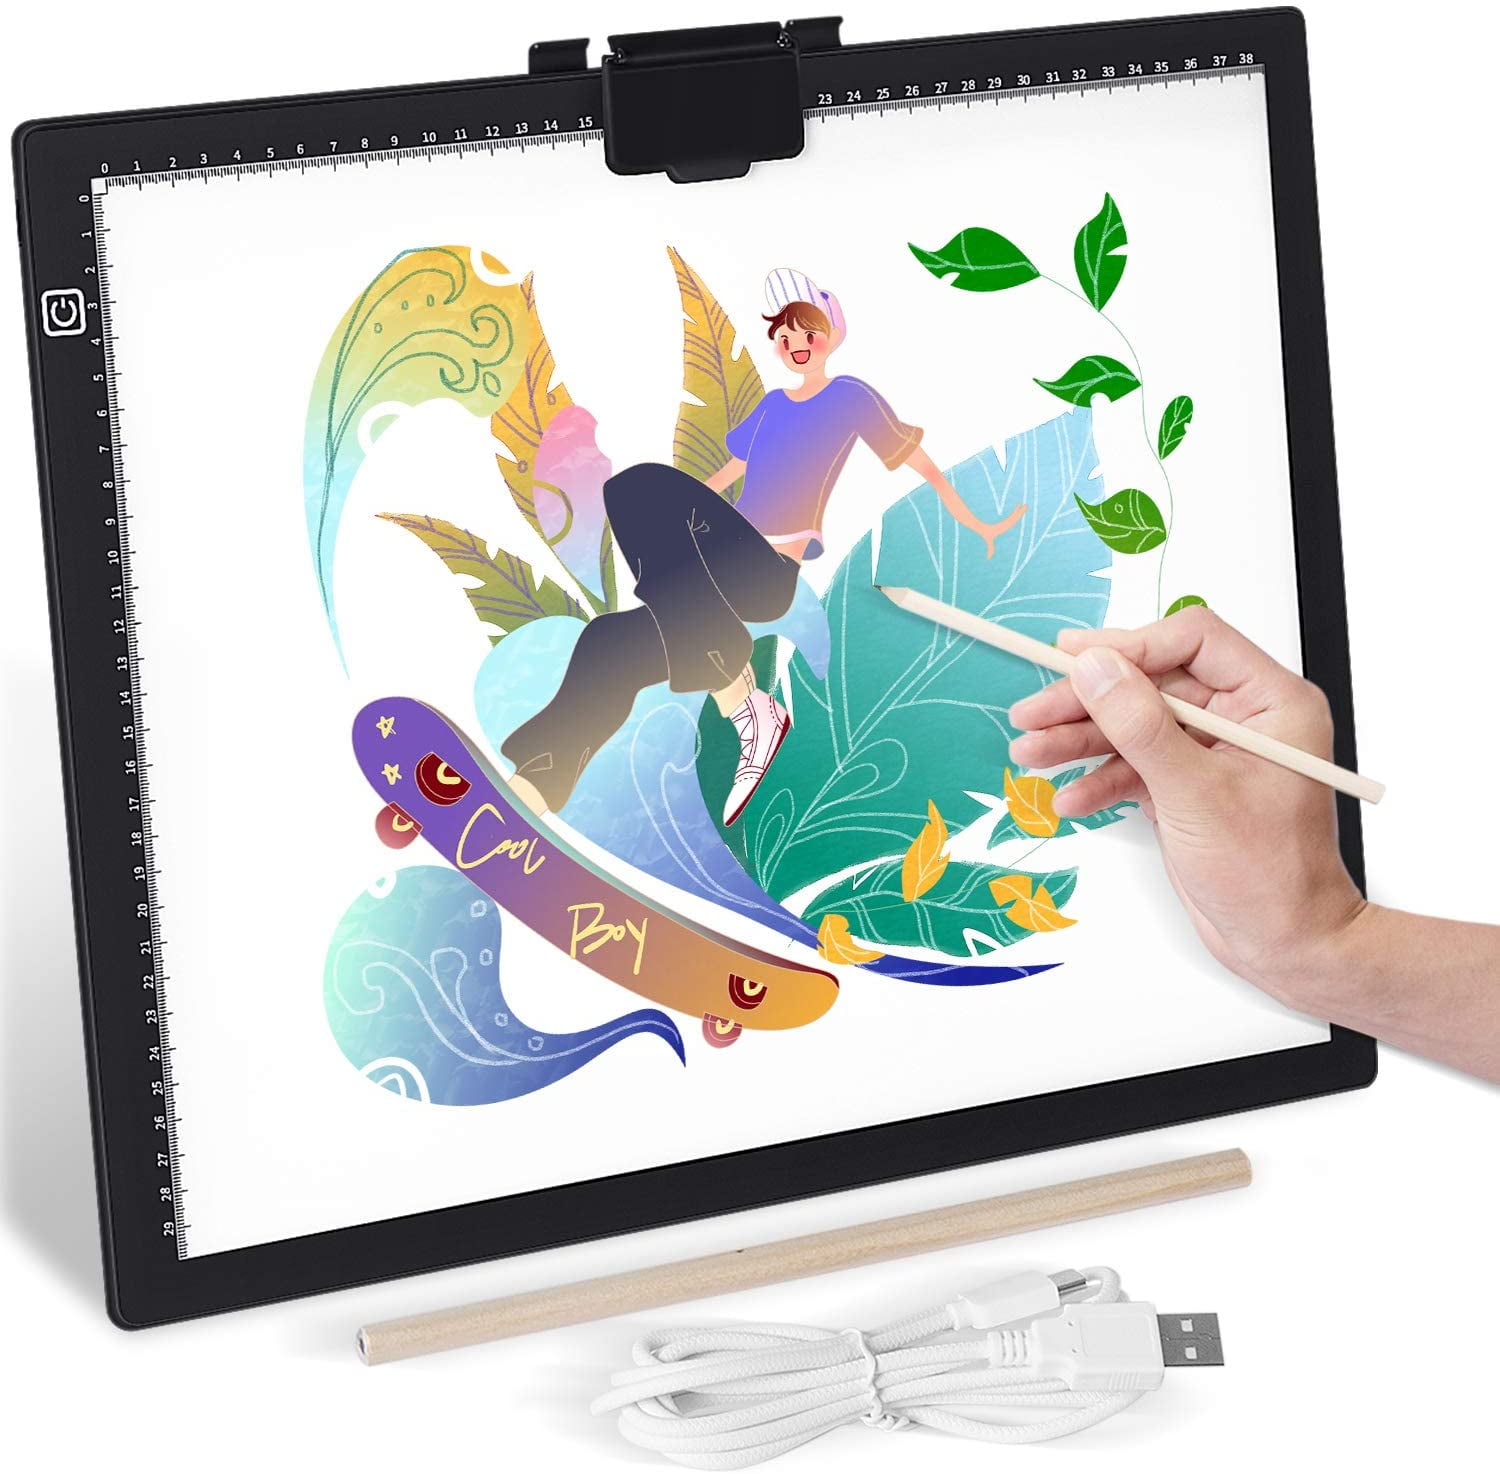 Artograph LightPad 920 LX 9x6 Inch Thin Dimmable LED Light Box for